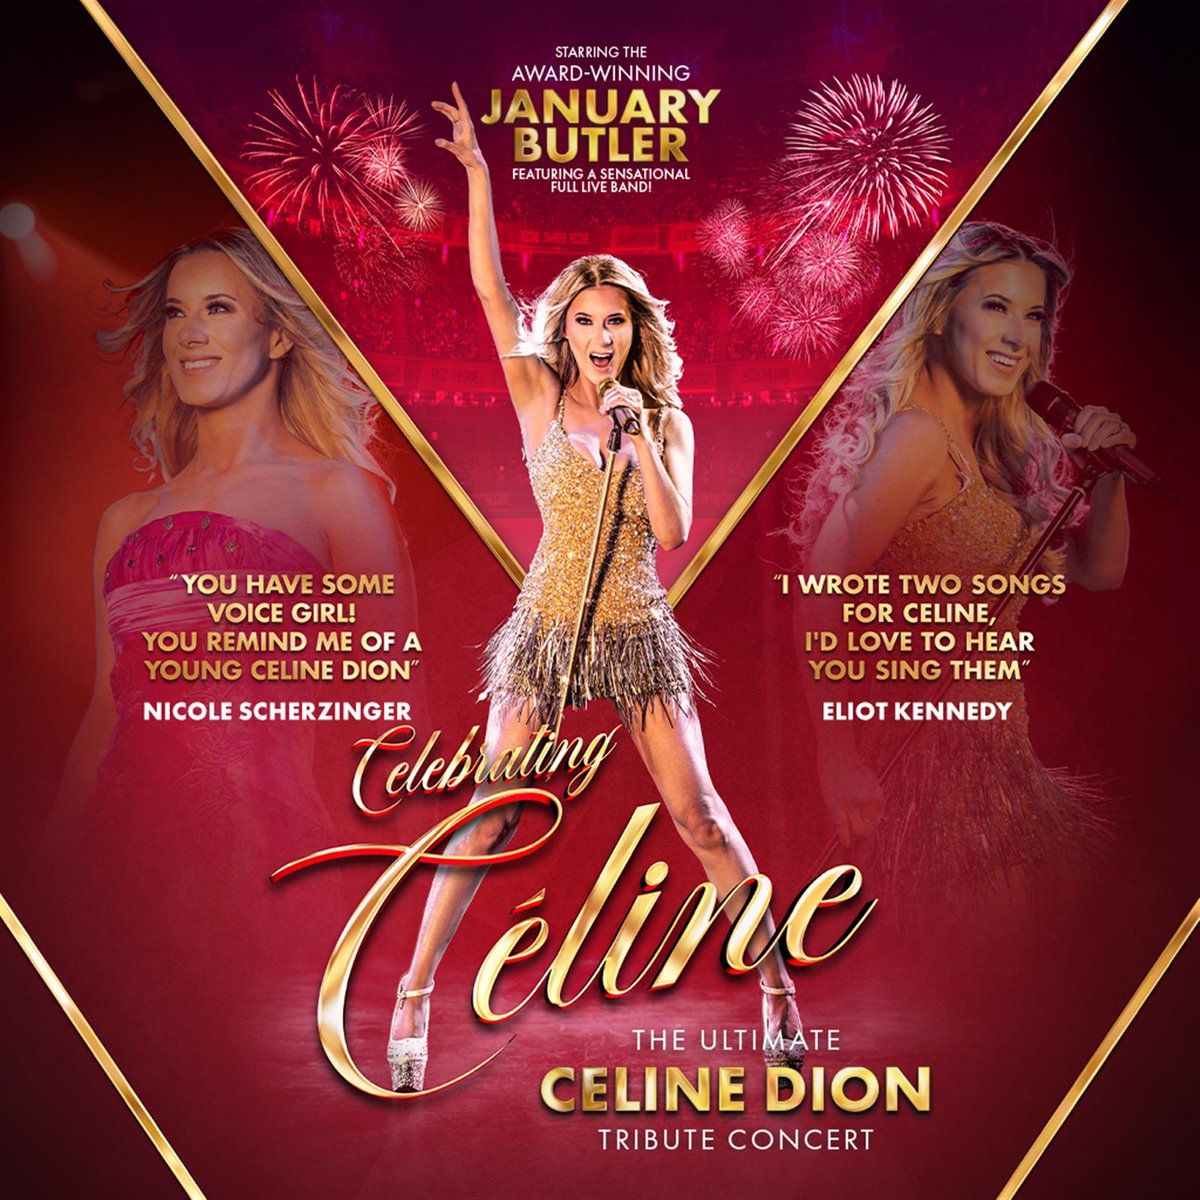 A tribute to a living icon 🎤 Celebrating Celine - The Ultimate Celine Dion Tribute Concert 📅 Thu 18 Jul 2024 🎟️ bit.ly/44yxgo2 Starring, January Butler, no one else comes close to recreating the sound, look and feel of this incredibly loved & admired global megastar